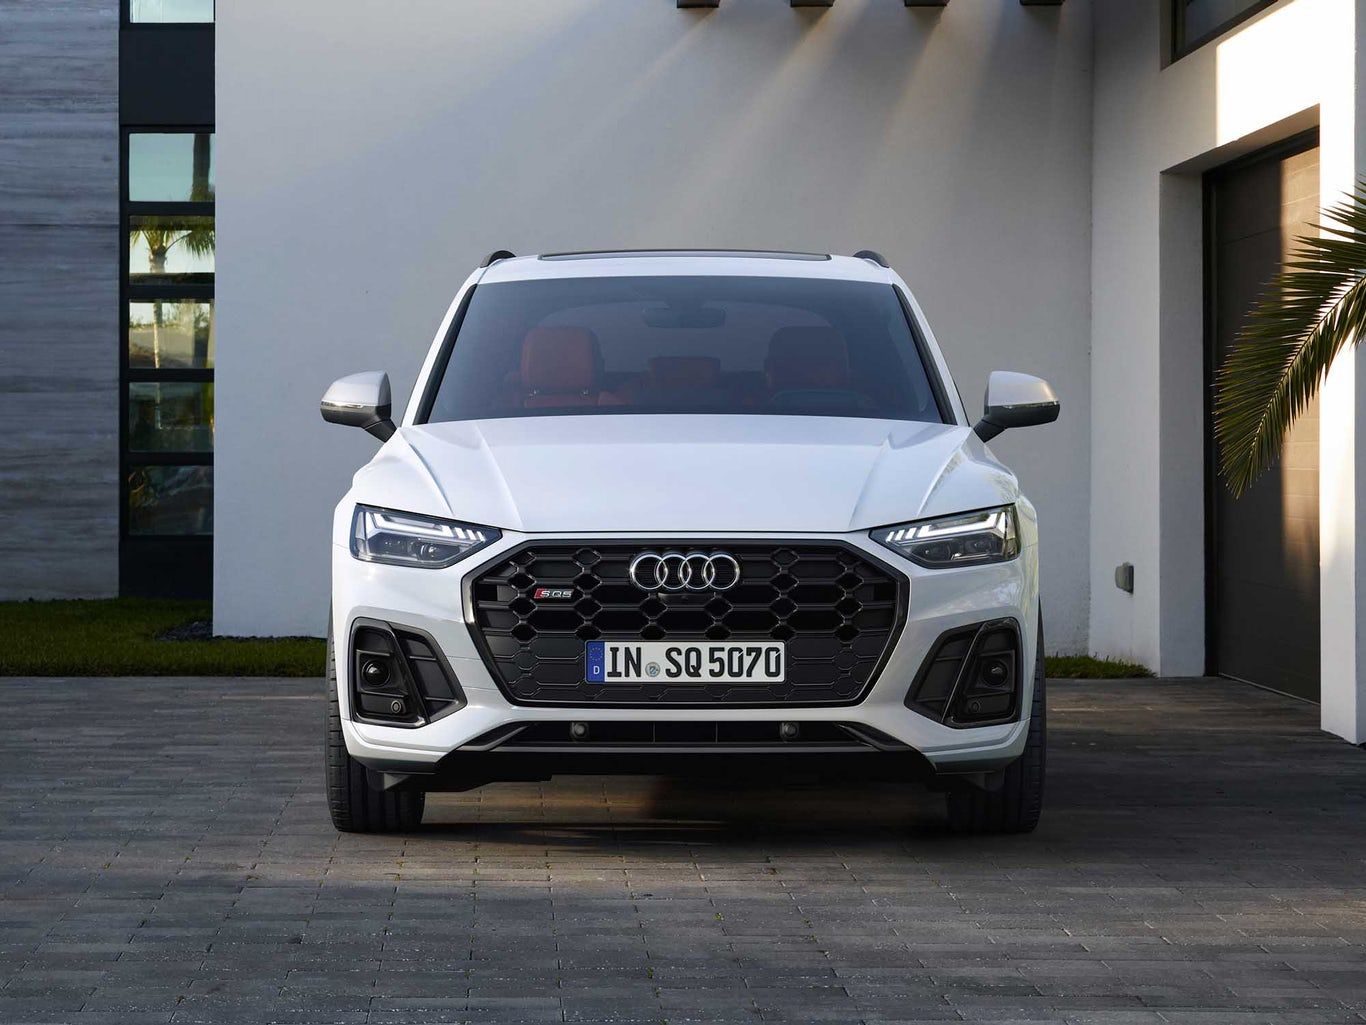 2021 Audi SQ5 Revealed Price, Specs And Release Date